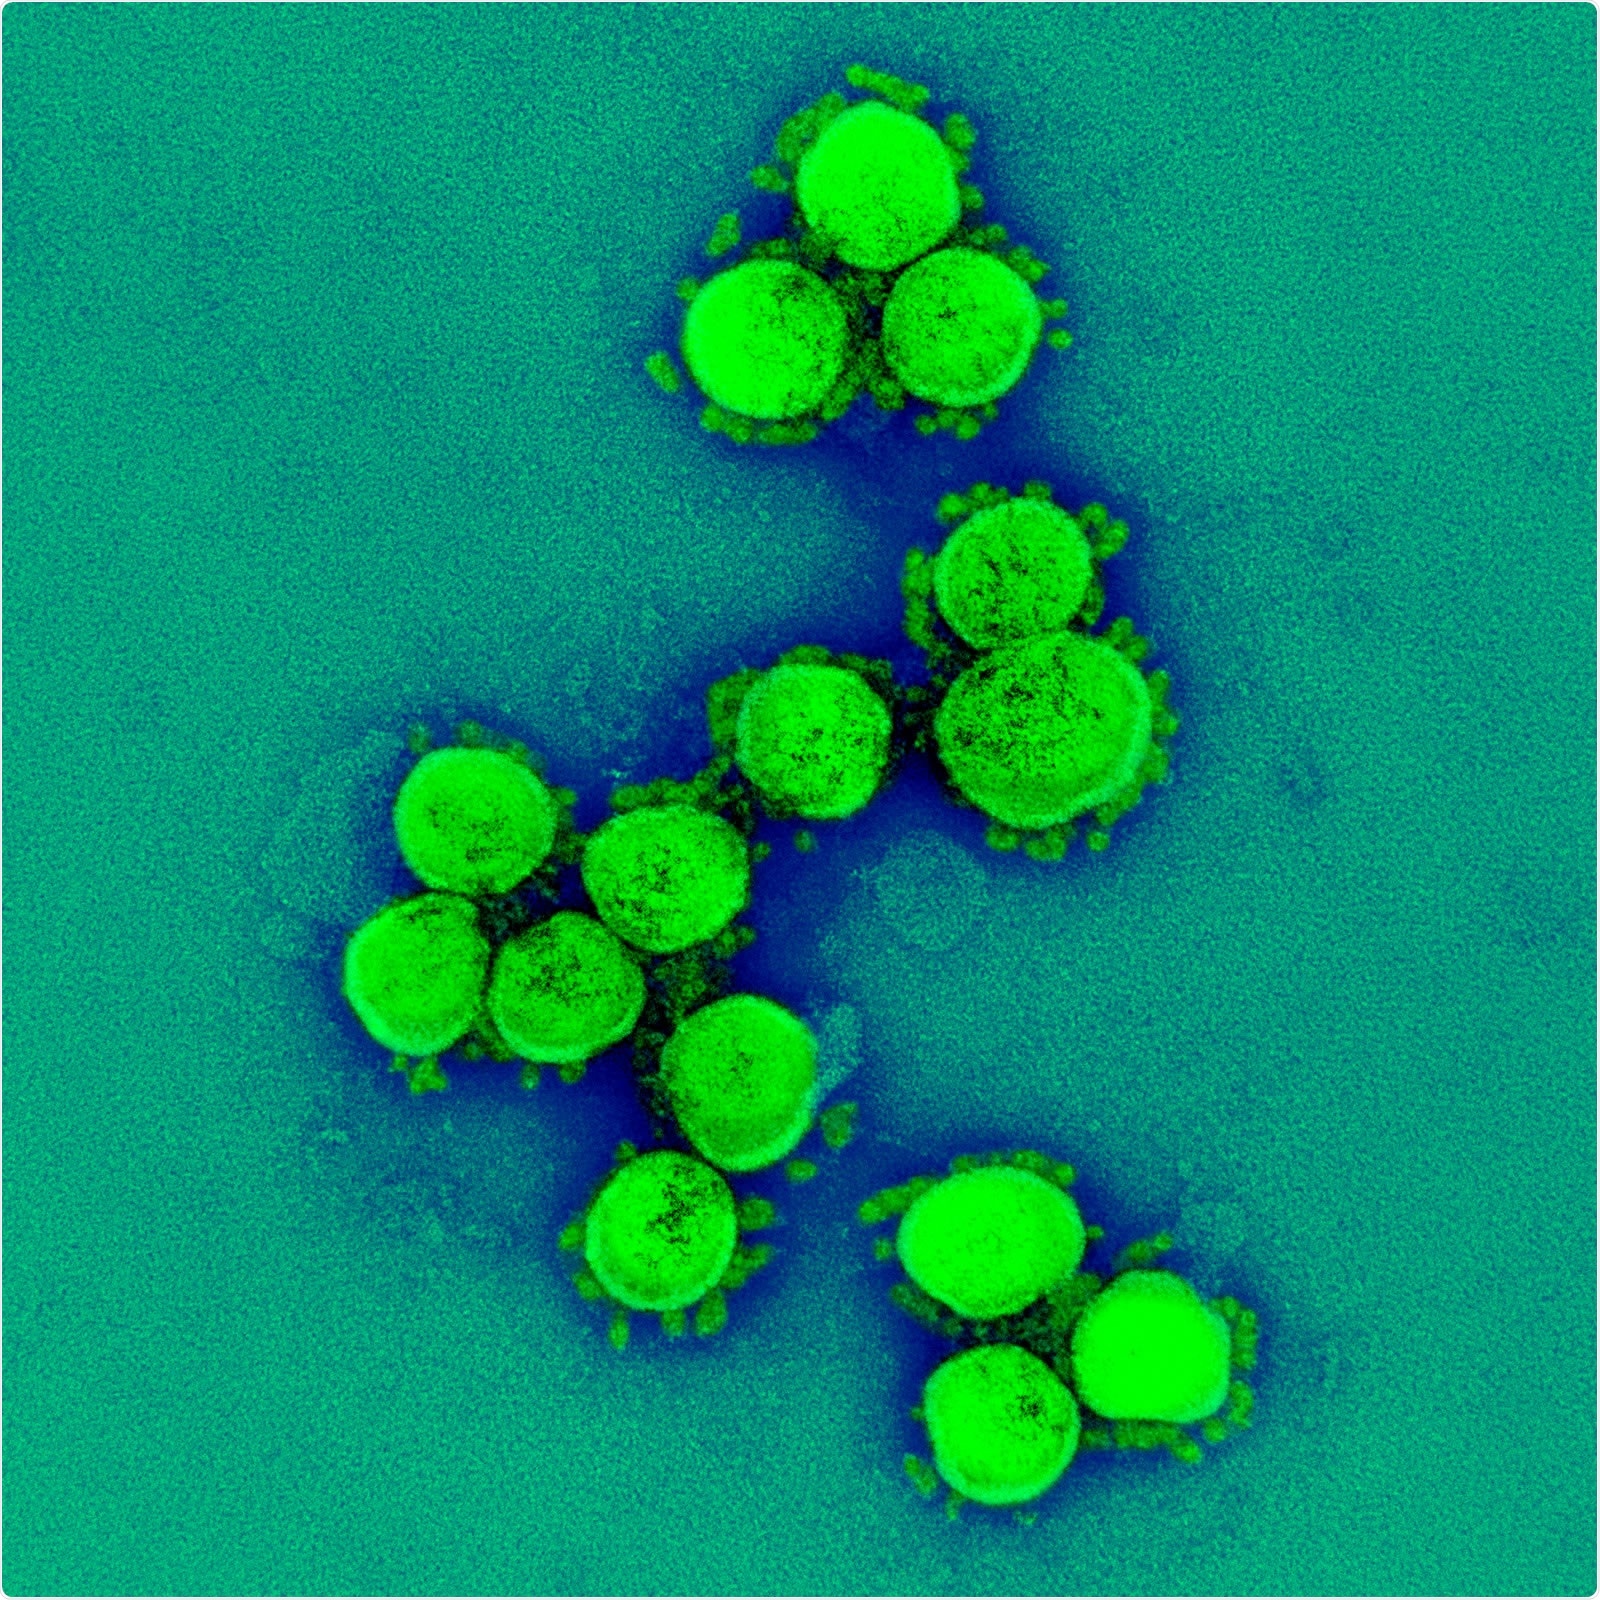 Transmission electron micrograph of SARS-CoV-2 virus particles, isolated from a patient. Image captured and color-enhanced at the NIAID Integrated Research Facility (IRF) in Fort Detrick, Maryland. Credit: NIAID